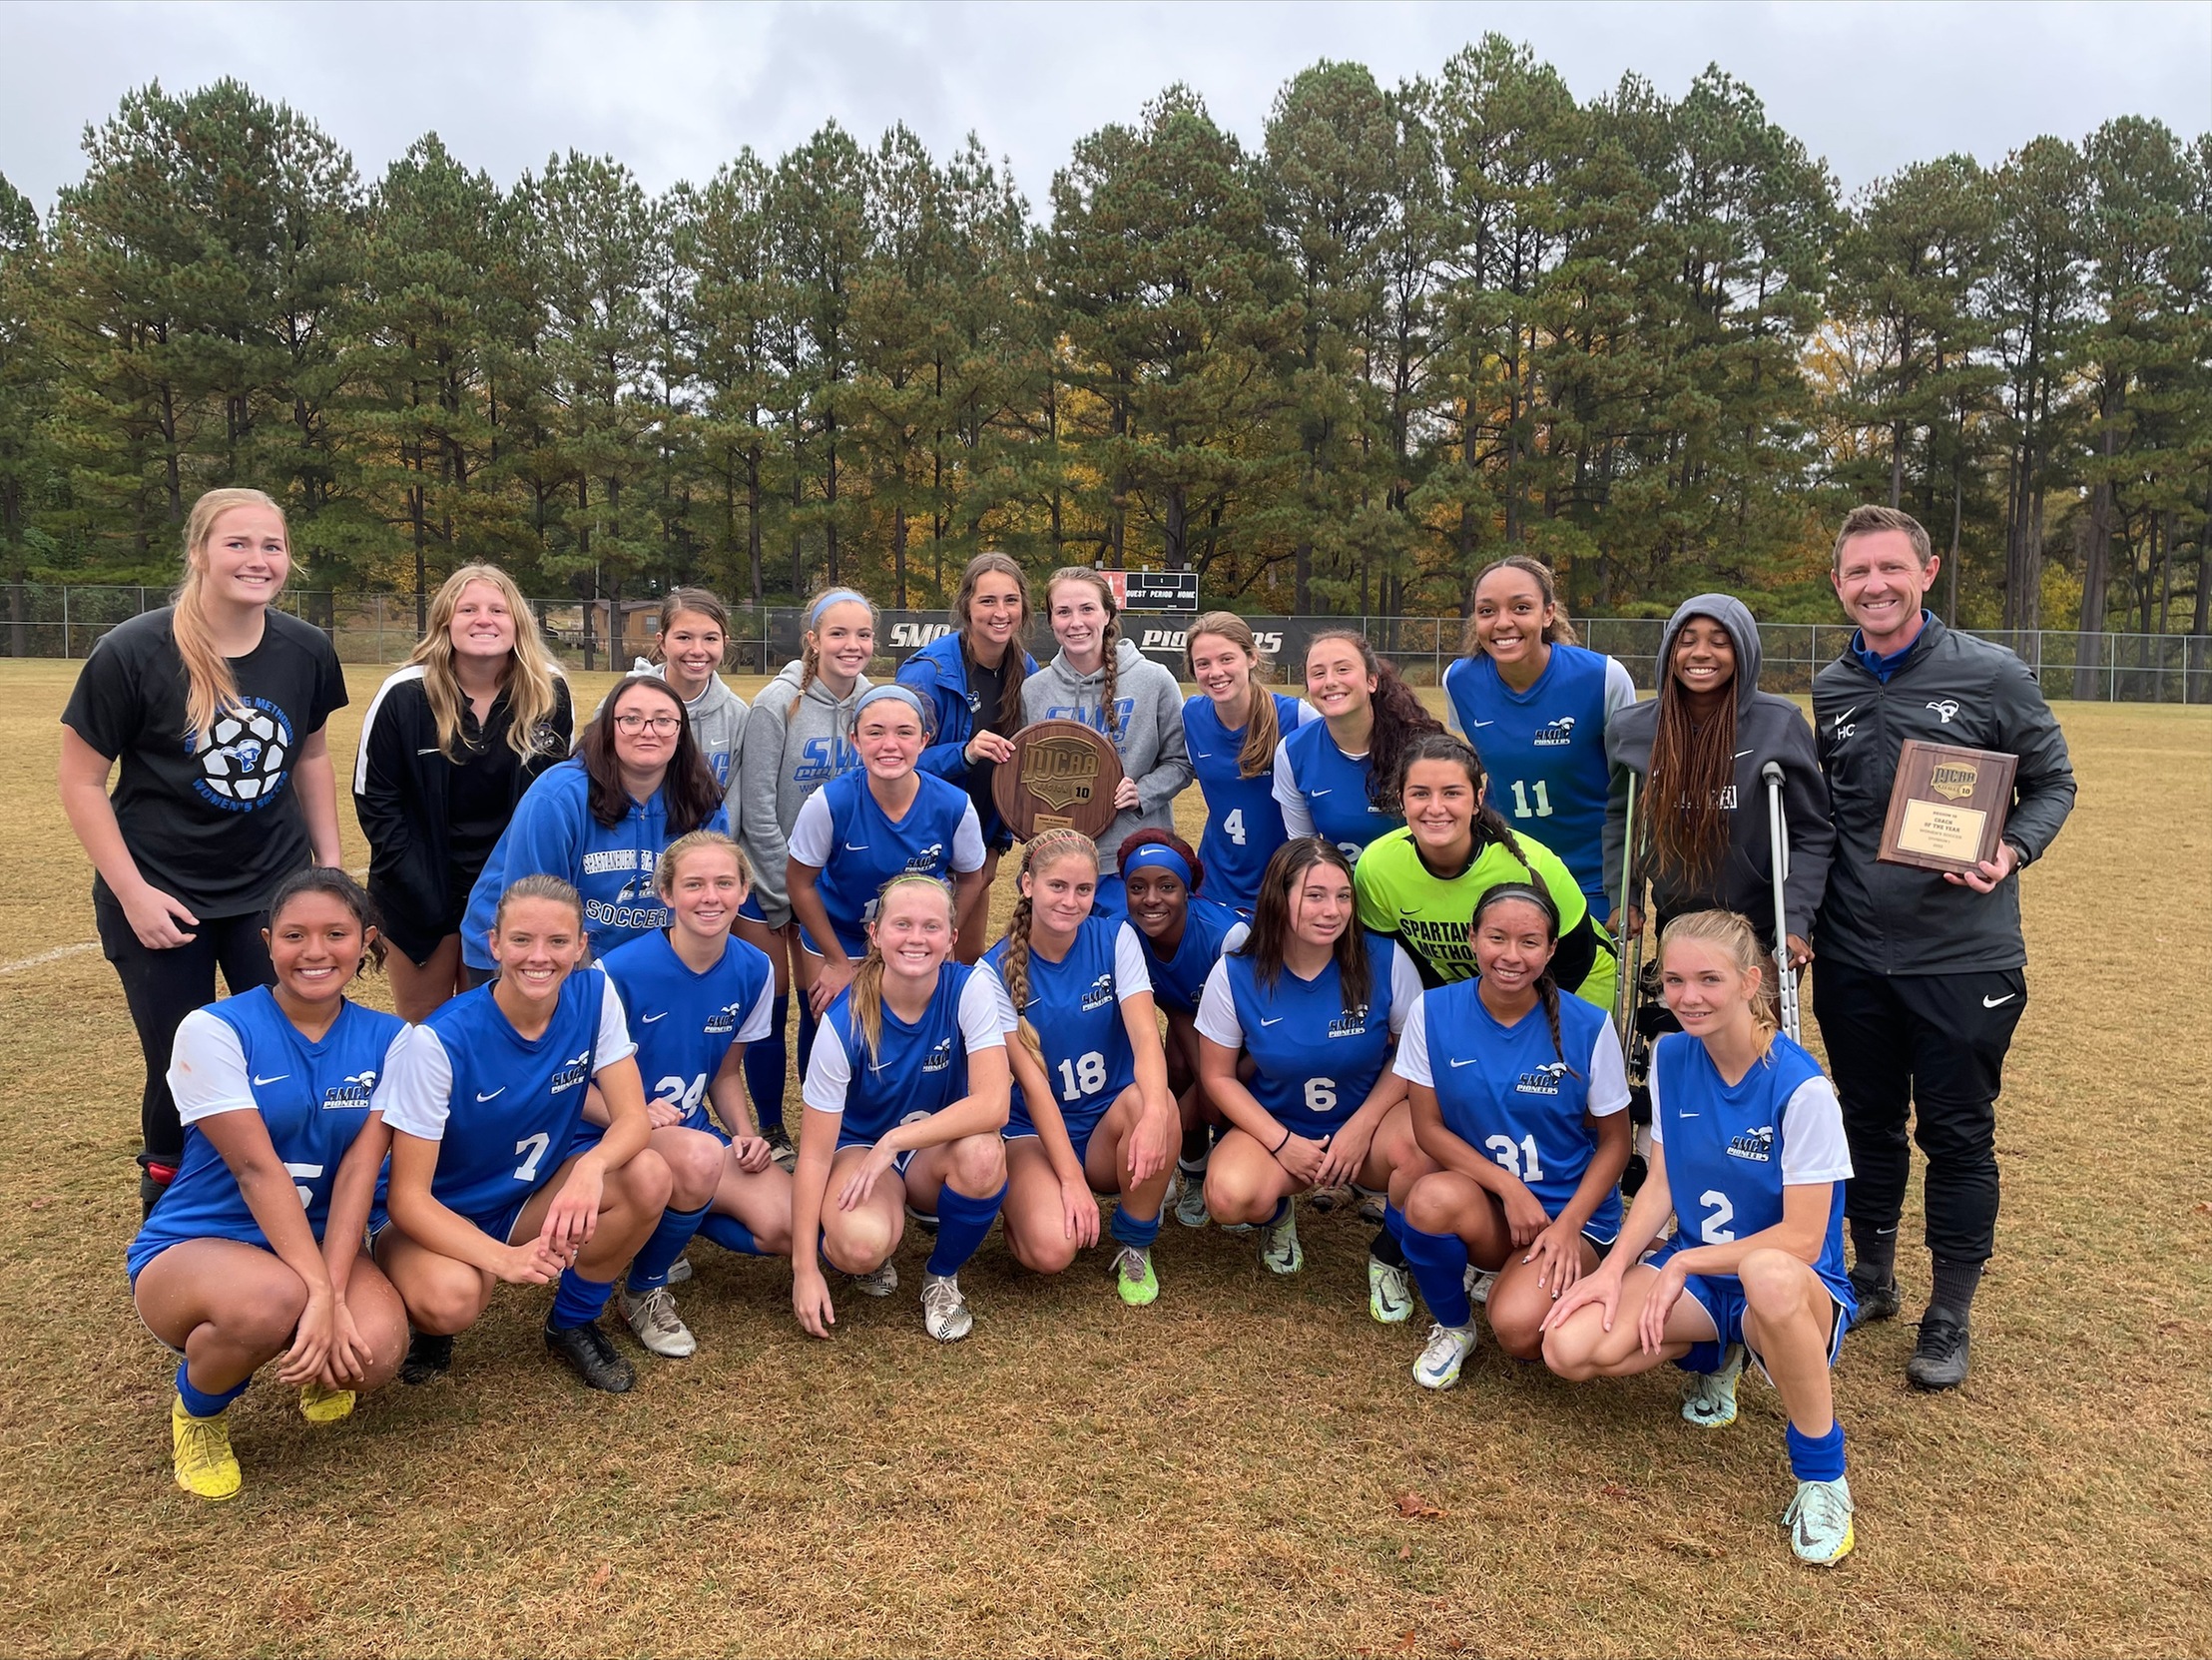 Lady Pioneers Capture Another Region 10 Championship